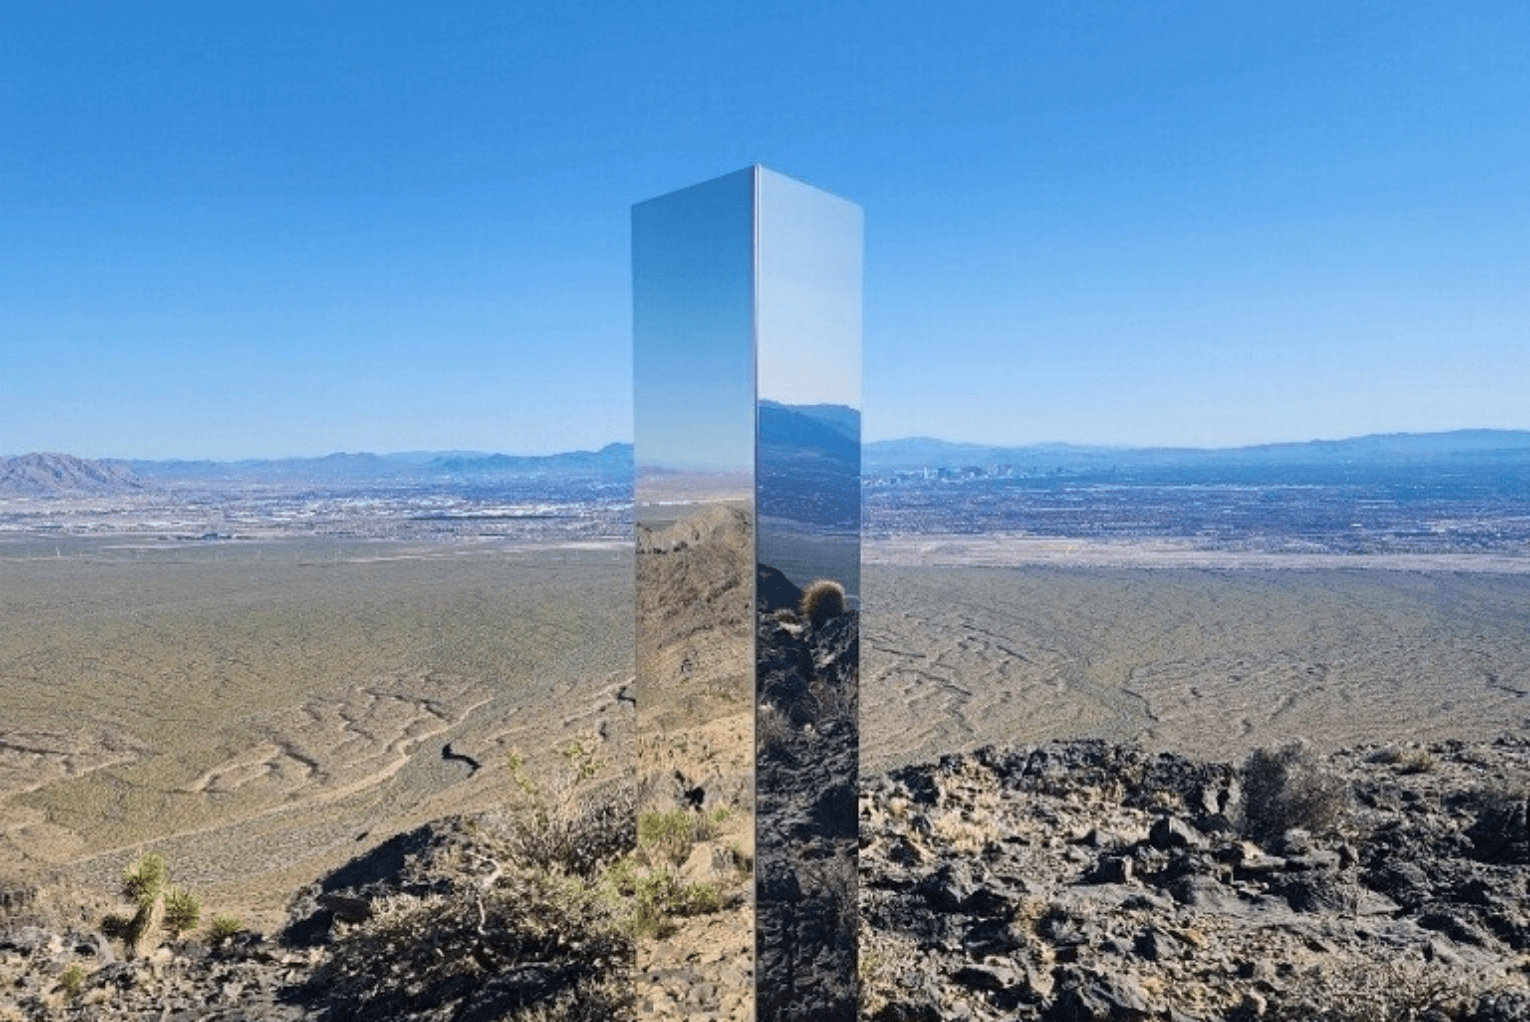 Monoliths: A Supernatural Occurrence or an Out-of-Space Nightmare?